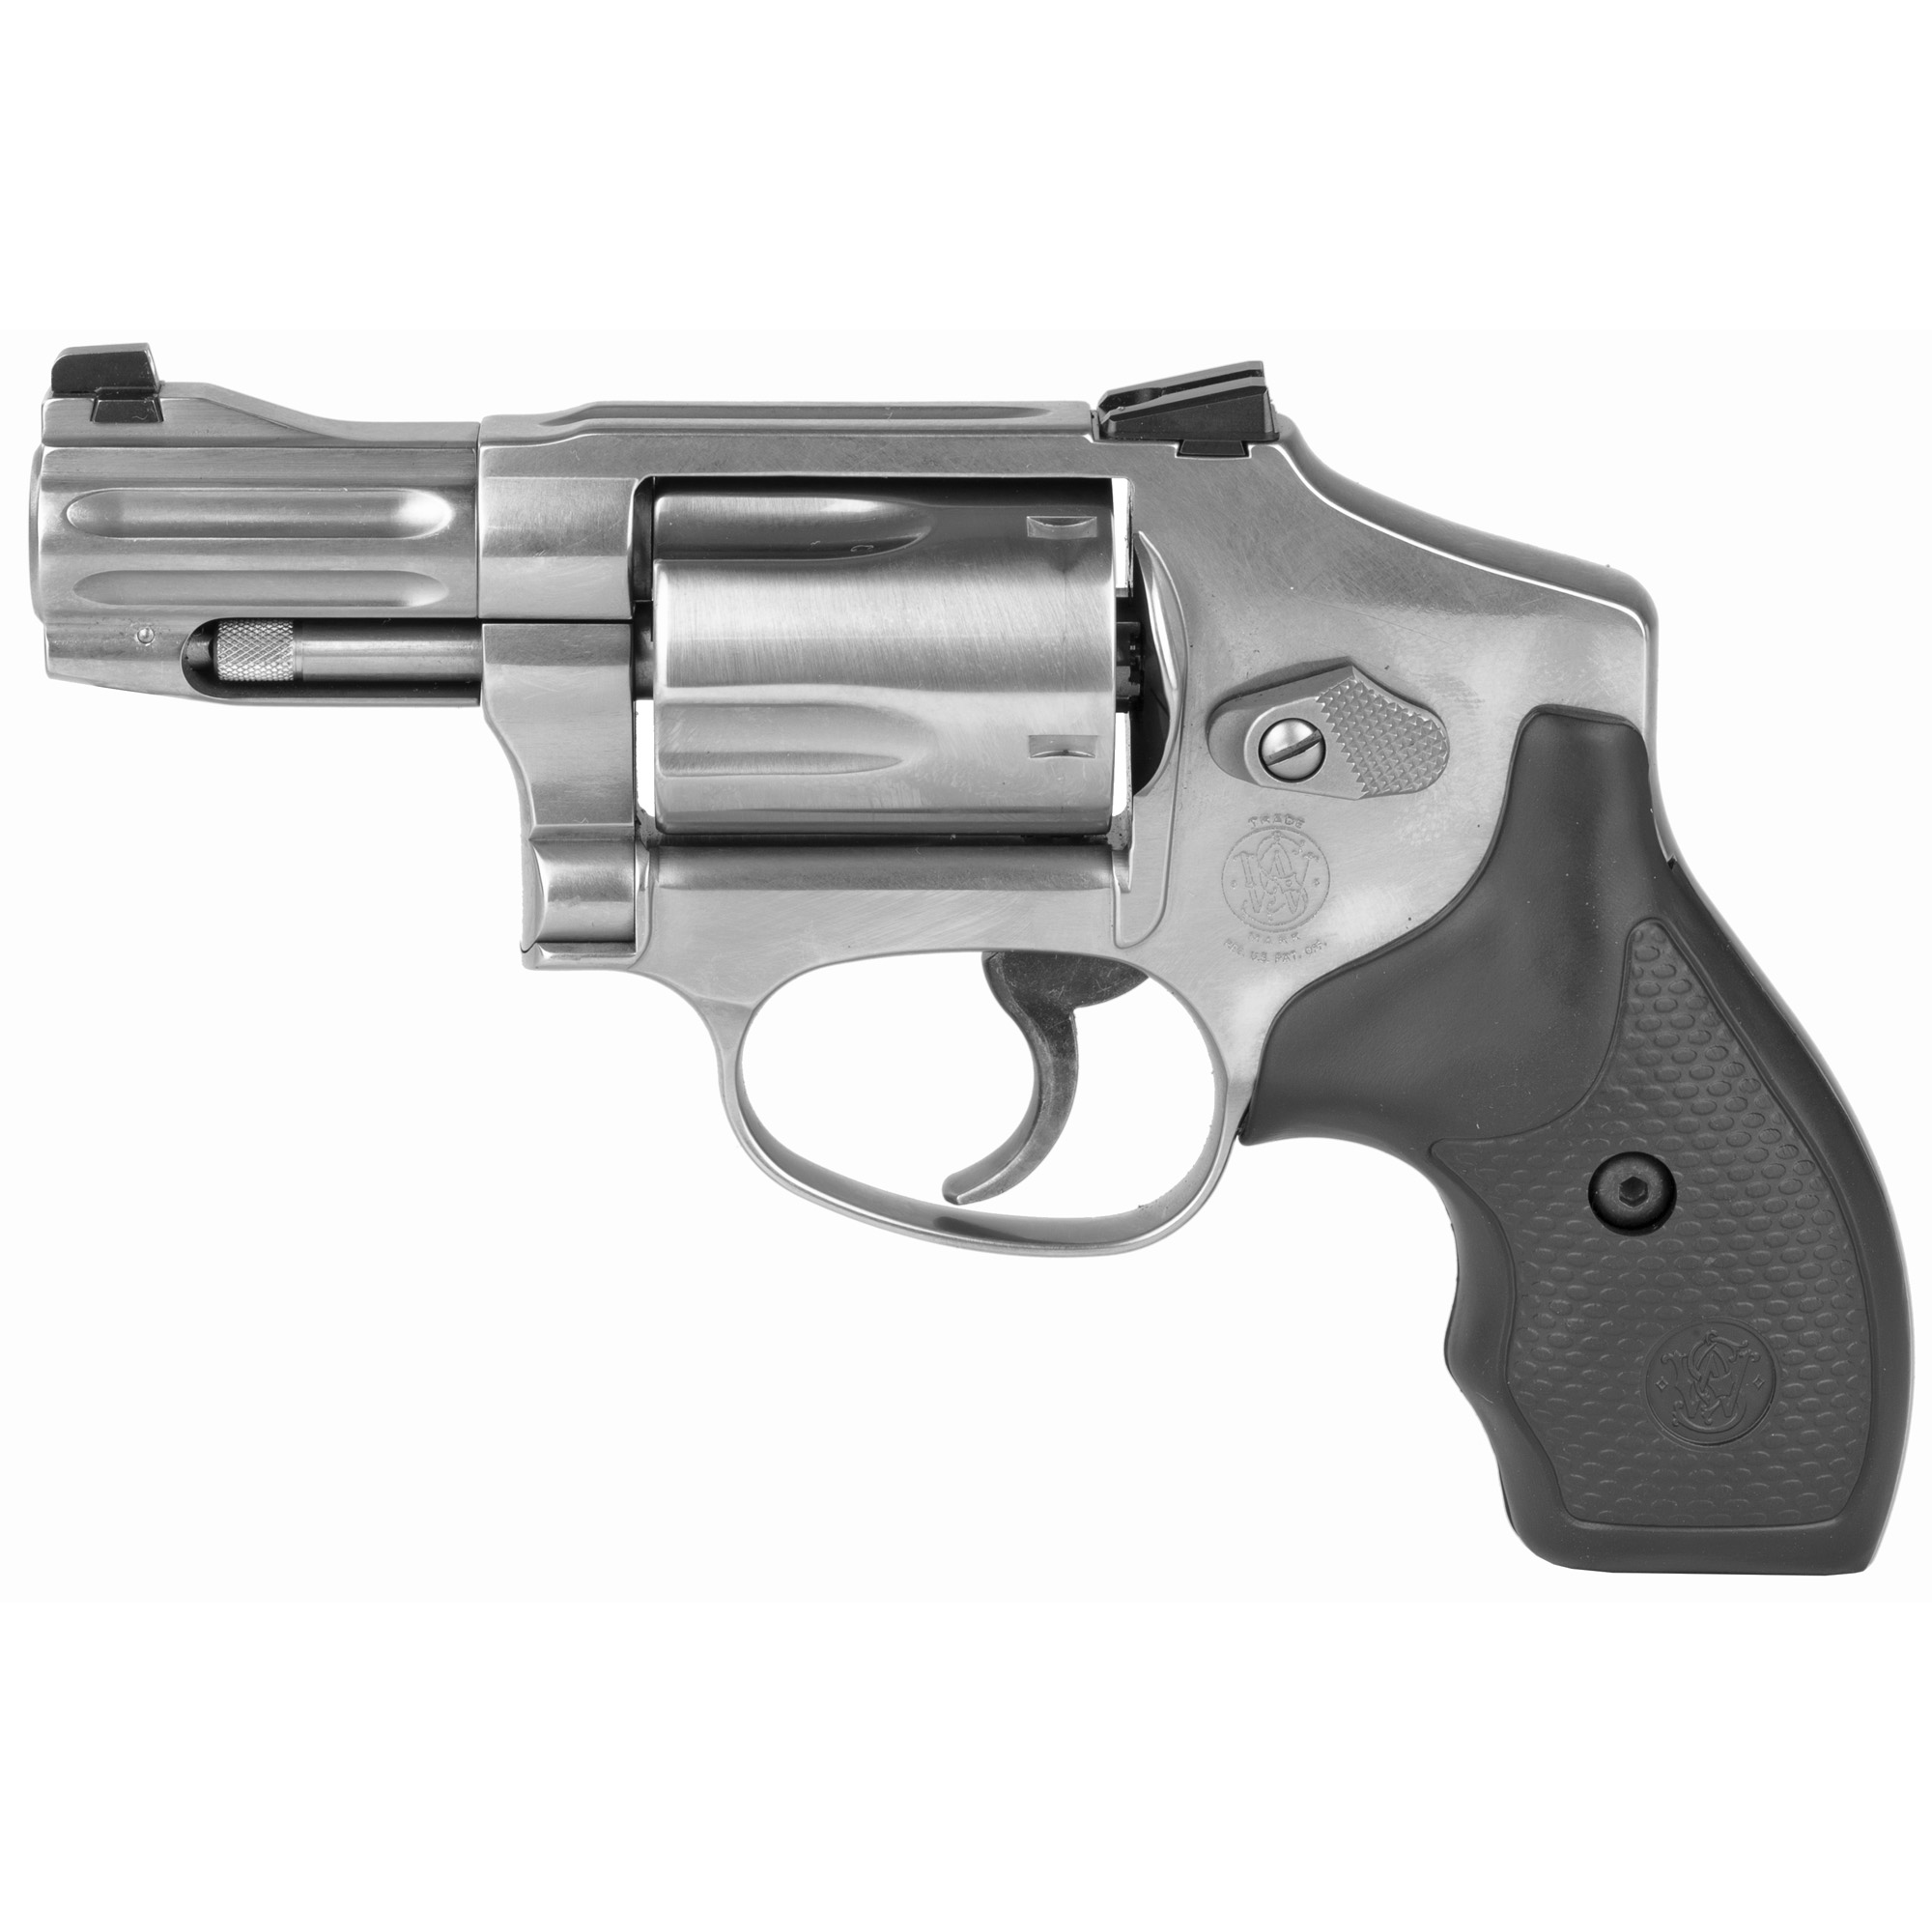 S&W 640 PRO 357MAG 2.13 5RD STS NS